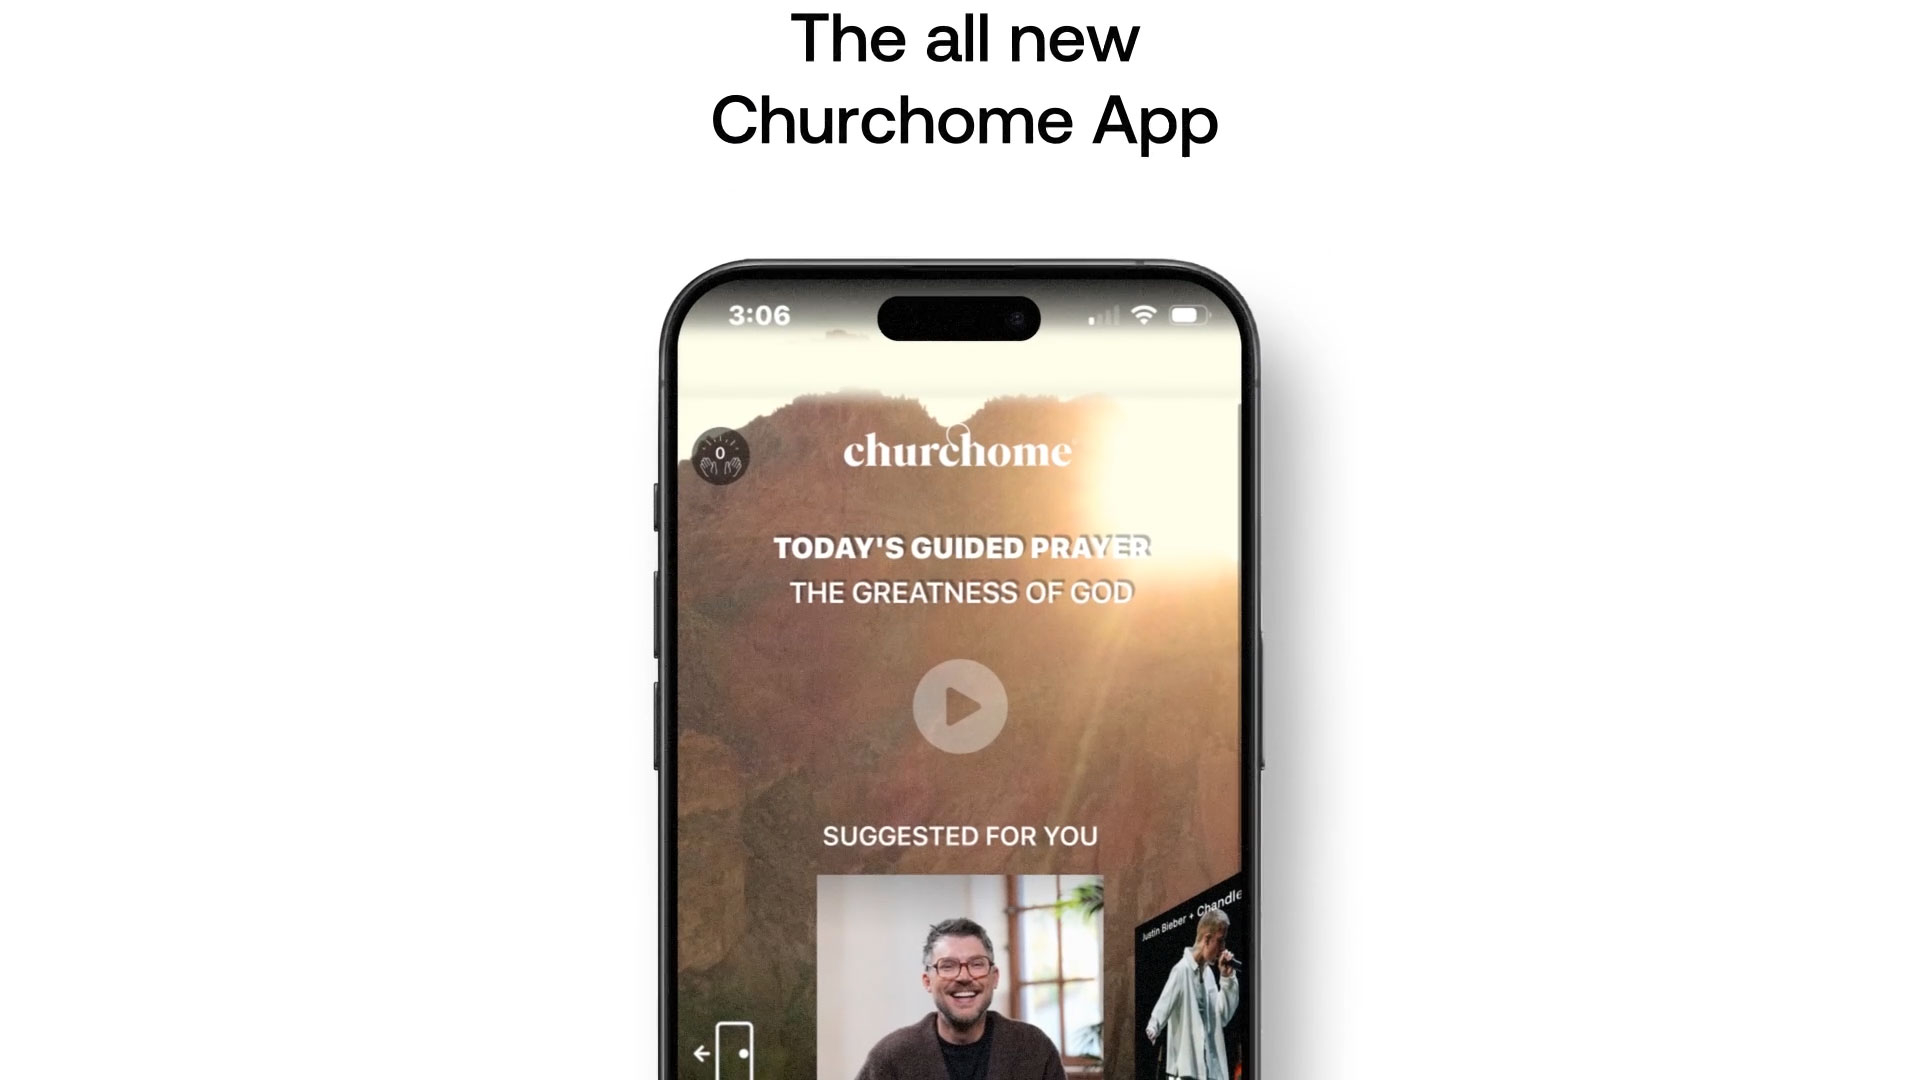 The Churchome app offers access to Weekly Services, Daily Guided Prayers, Pastor Chat, Uniquely Curated Content, and more.